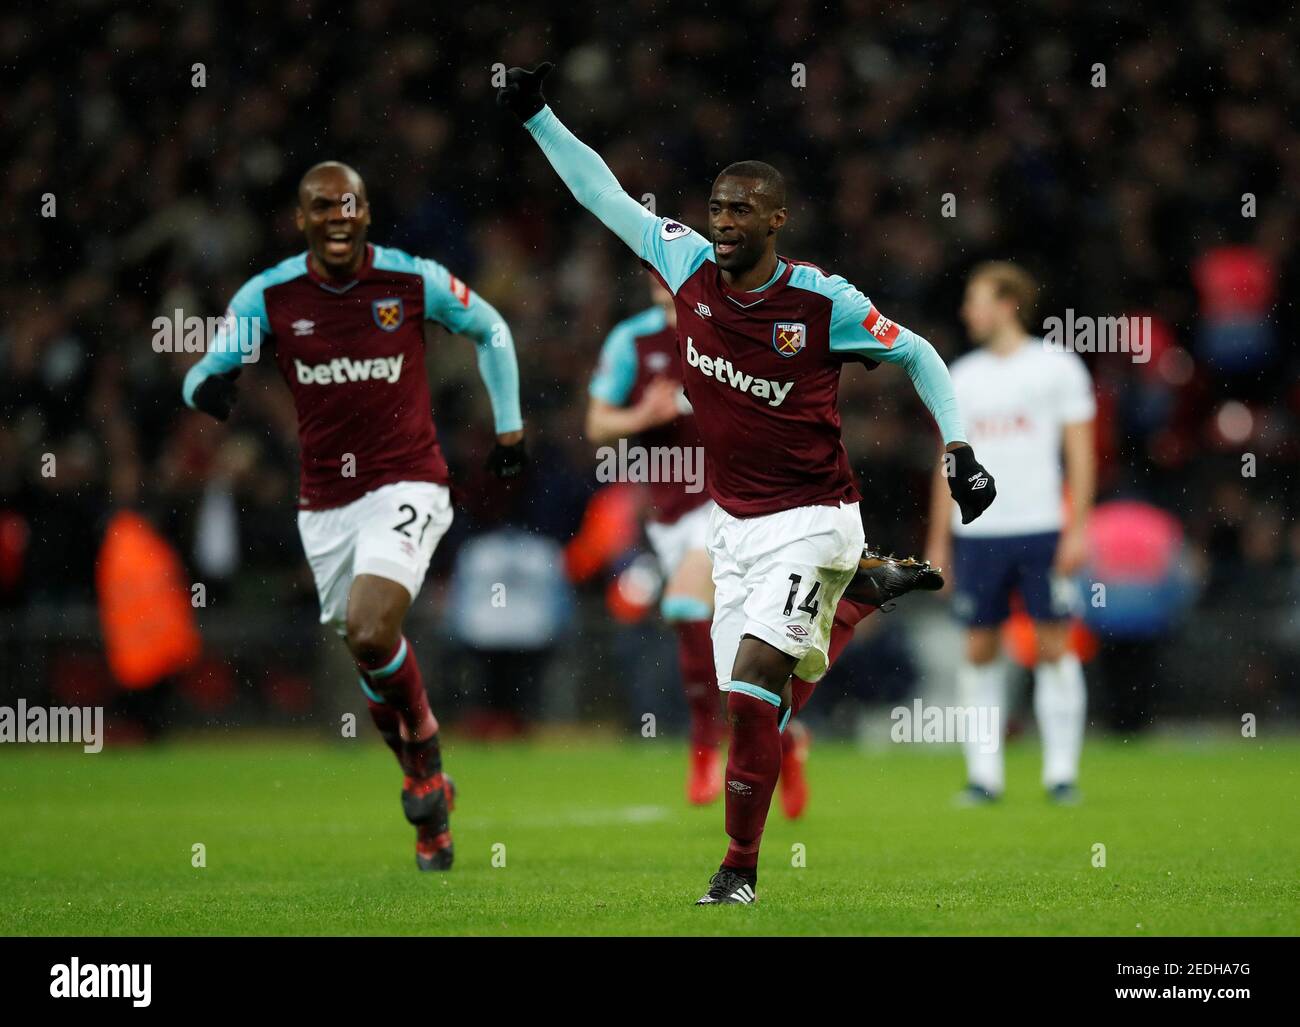 Soccer Football - Premier League - Tottenham Hotspur vs West Ham United - Wembley Stadium, London, Britain - January 4, 2018   West Ham United's Pedro Obiang celebrates scoring their first goal    REUTERS/Eddie Keogh    EDITORIAL USE ONLY. No use with unauthorized audio, video, data, fixture lists, club/league logos or 'live' services. Online in-match use limited to 75 images, no video emulation. No use in betting, games or single club/league/player publications.  Please contact your account representative for further details. Stock Photo